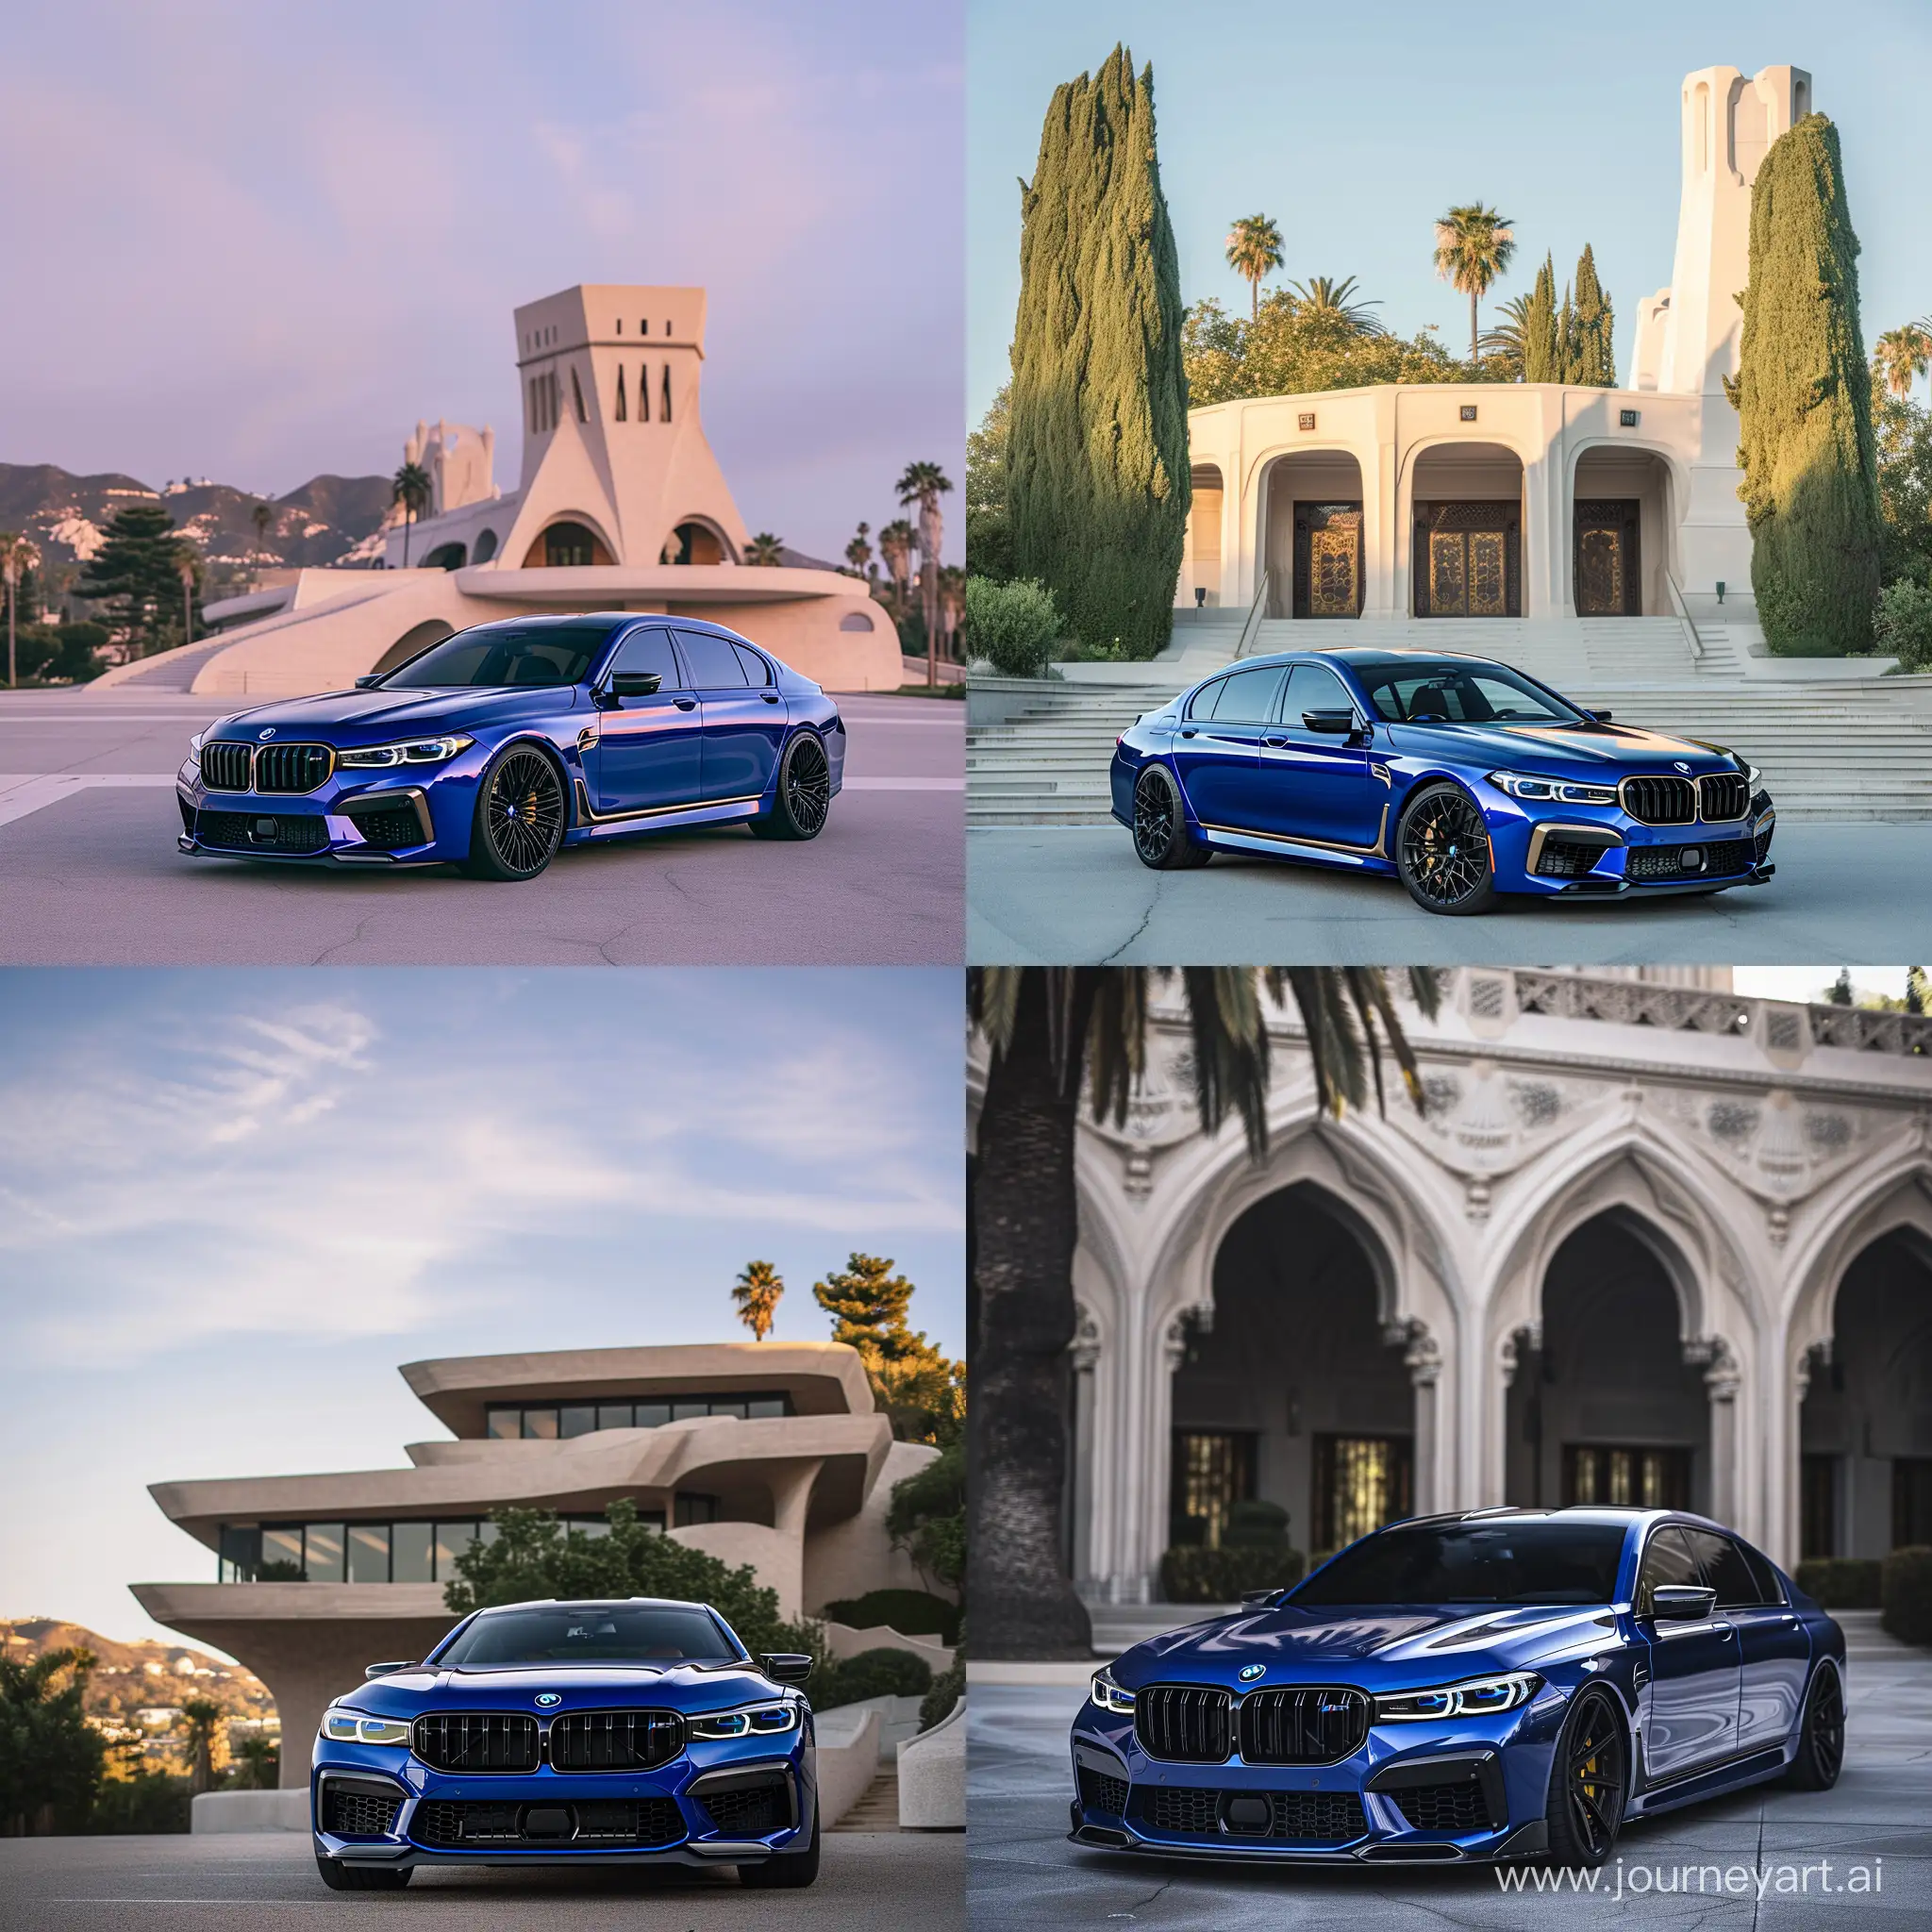 Luxurious-Blue-BMW-M7-Parked-in-Front-of-Richard-Neutras-PrecisionDesigned-Luxury-Building